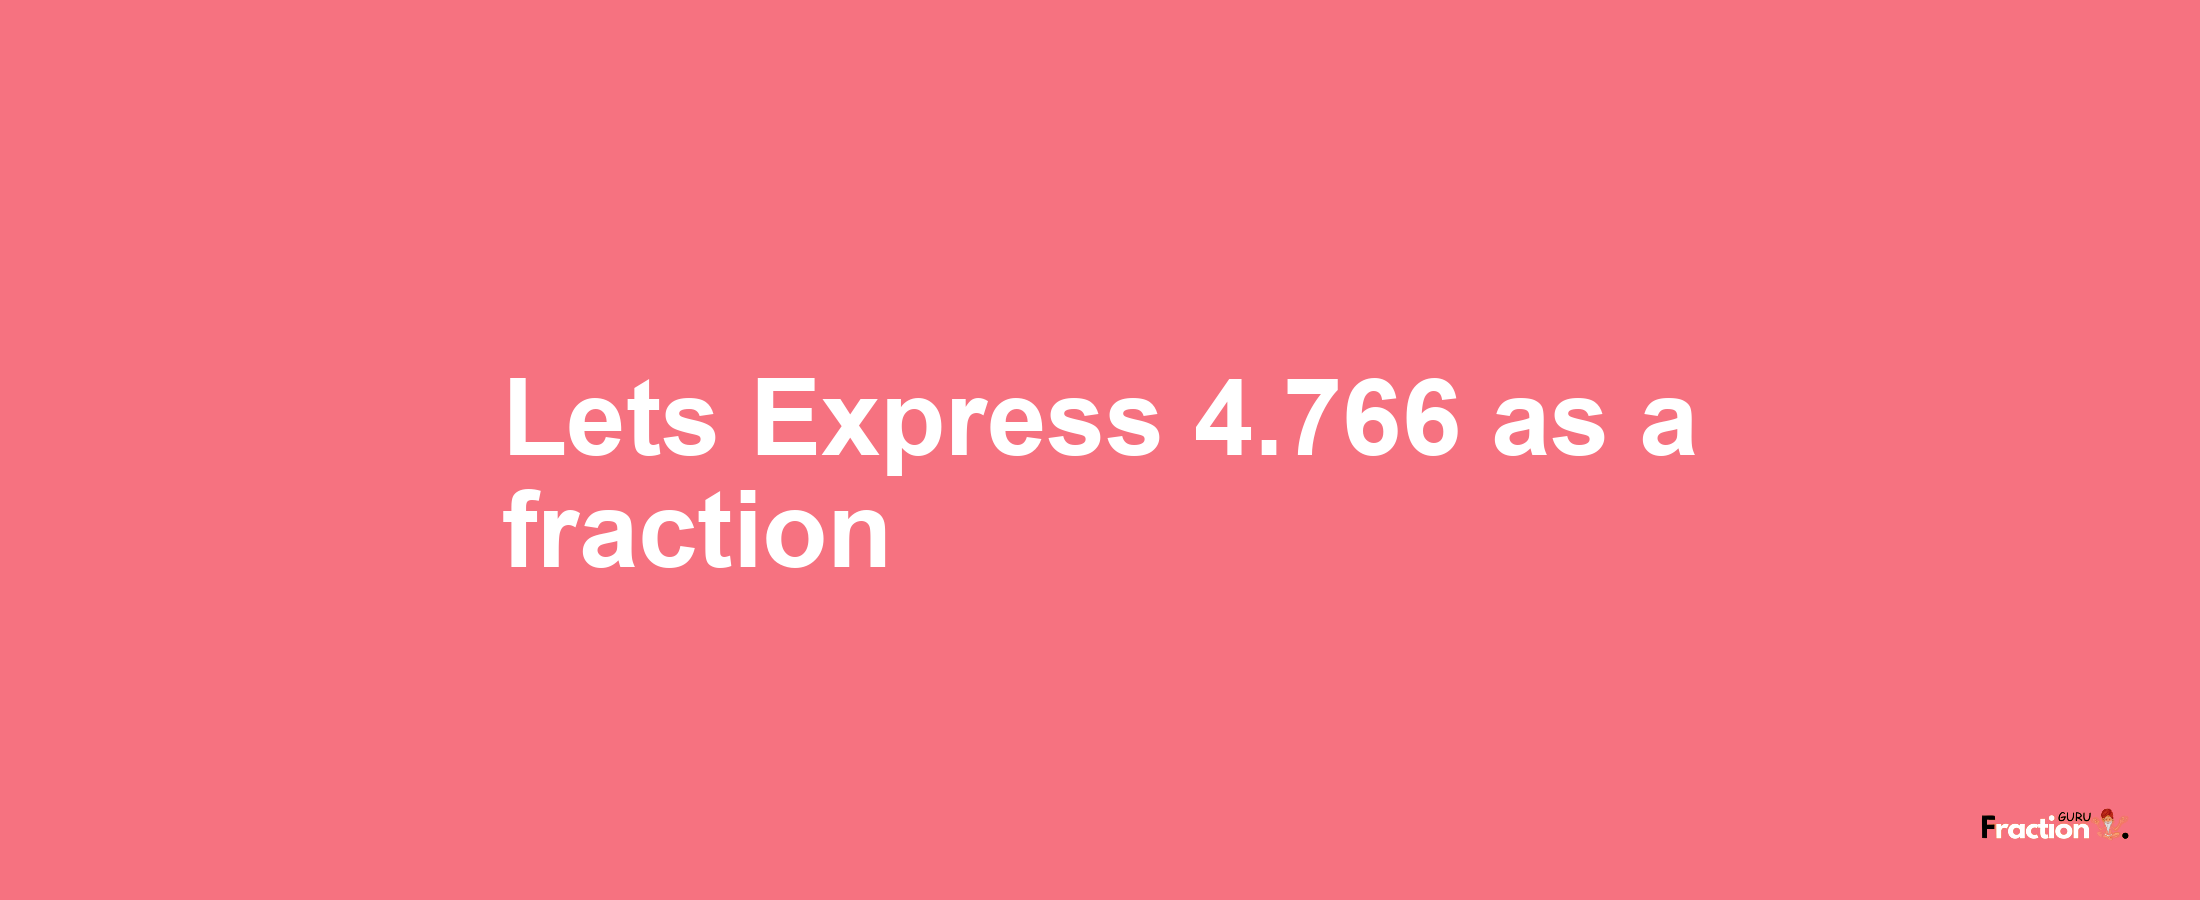 Lets Express 4.766 as afraction